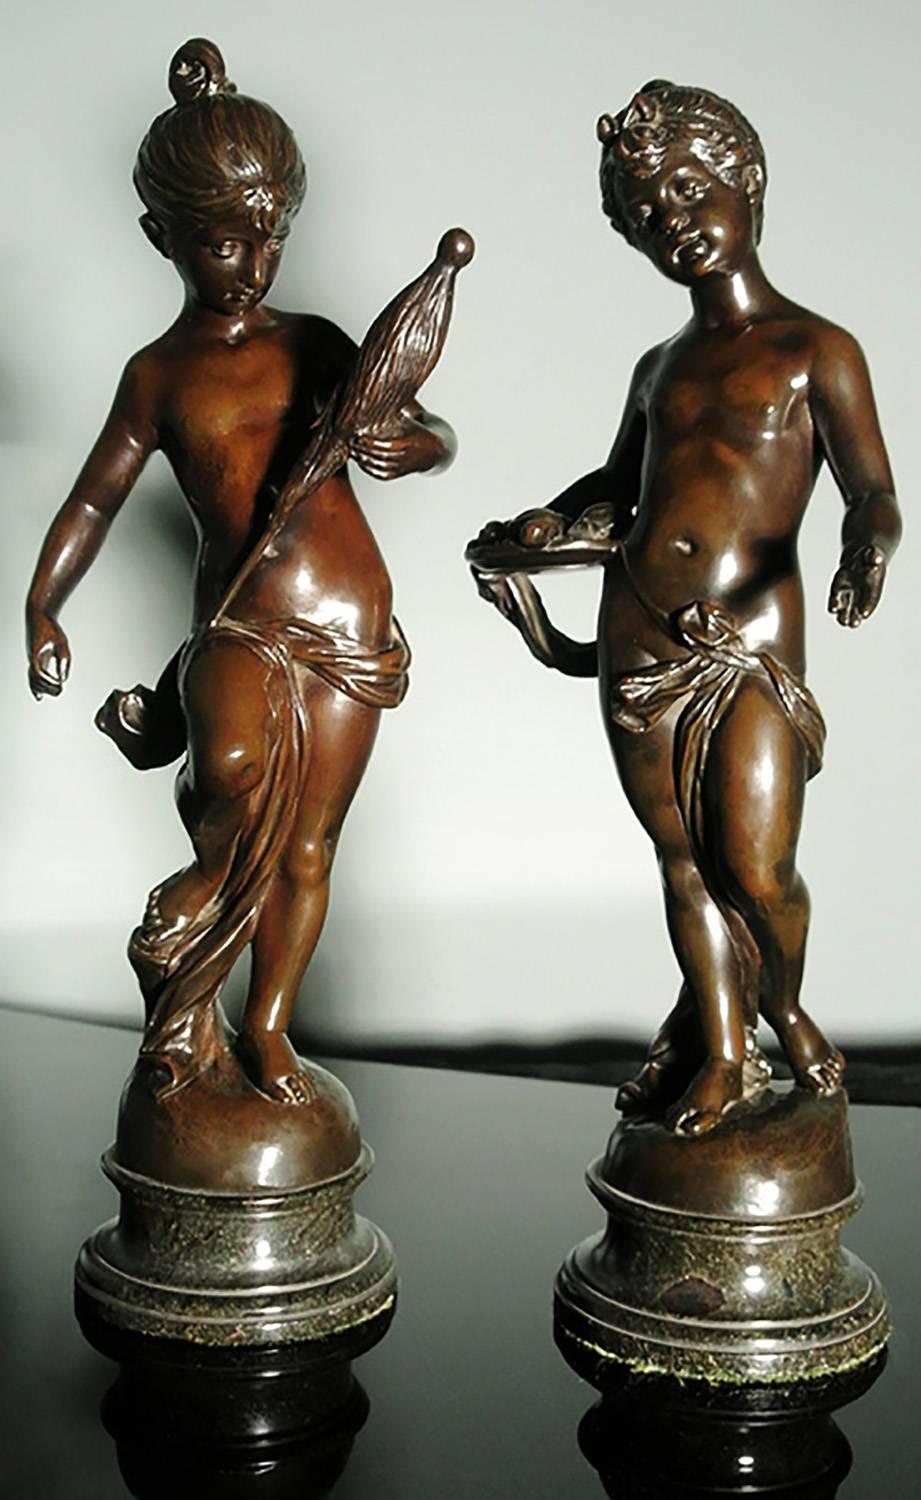 A very good pair of 19th century bronze figures of young girls, one offering fruit from a basket and the other is hand spinning flax. Both on original marble socles, the base of one figure signed A. Mayer. 

When removed from socles, the bronzes